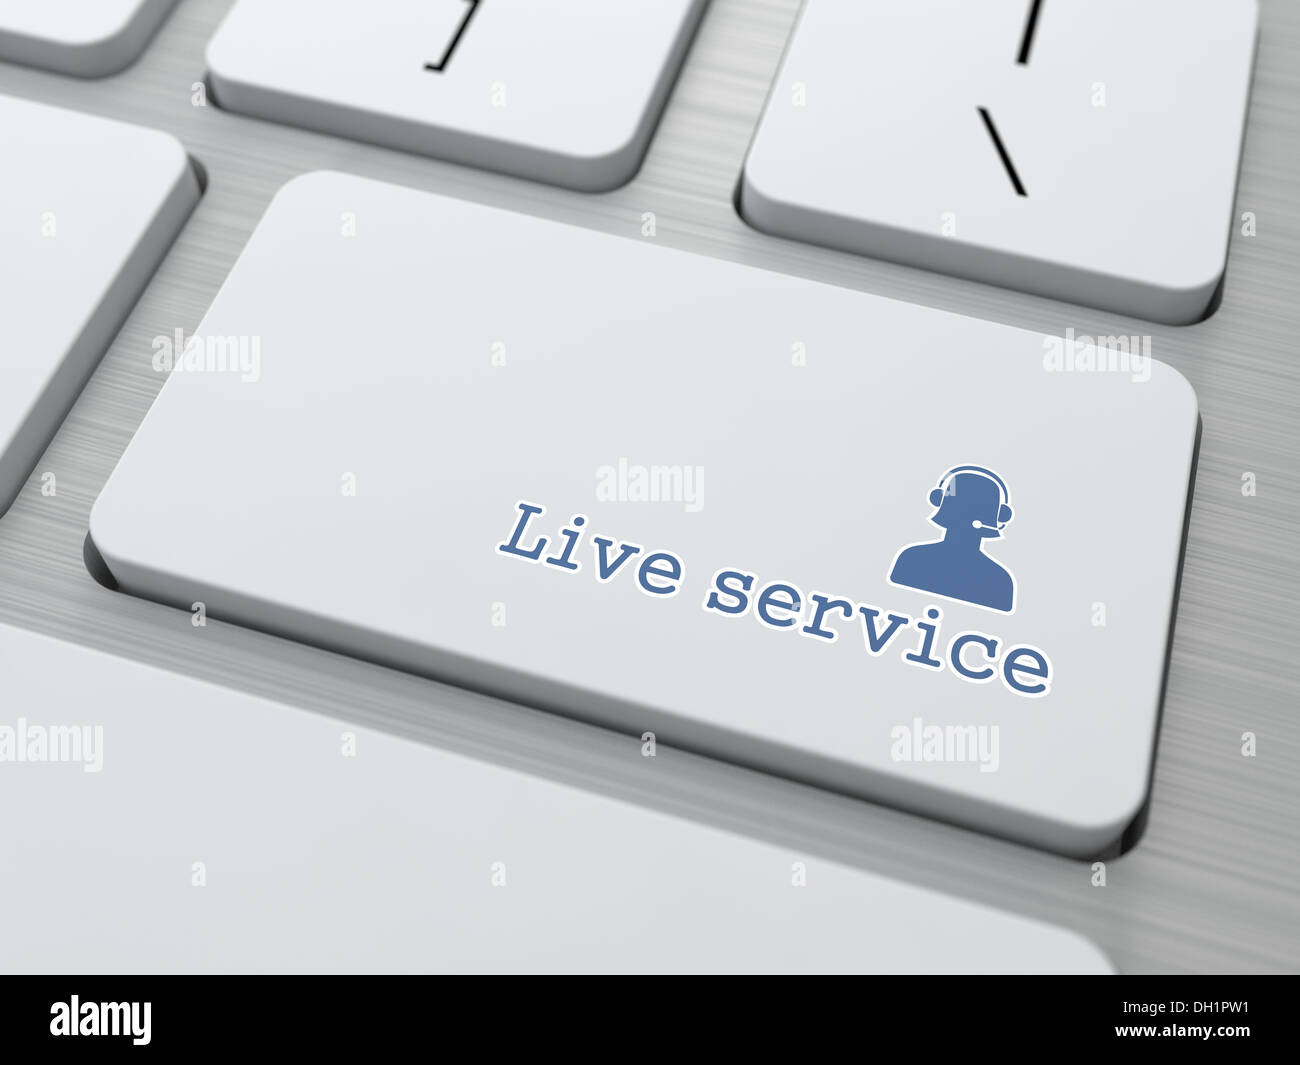 Button on Keyboard: 'Live Service' Stock Photo